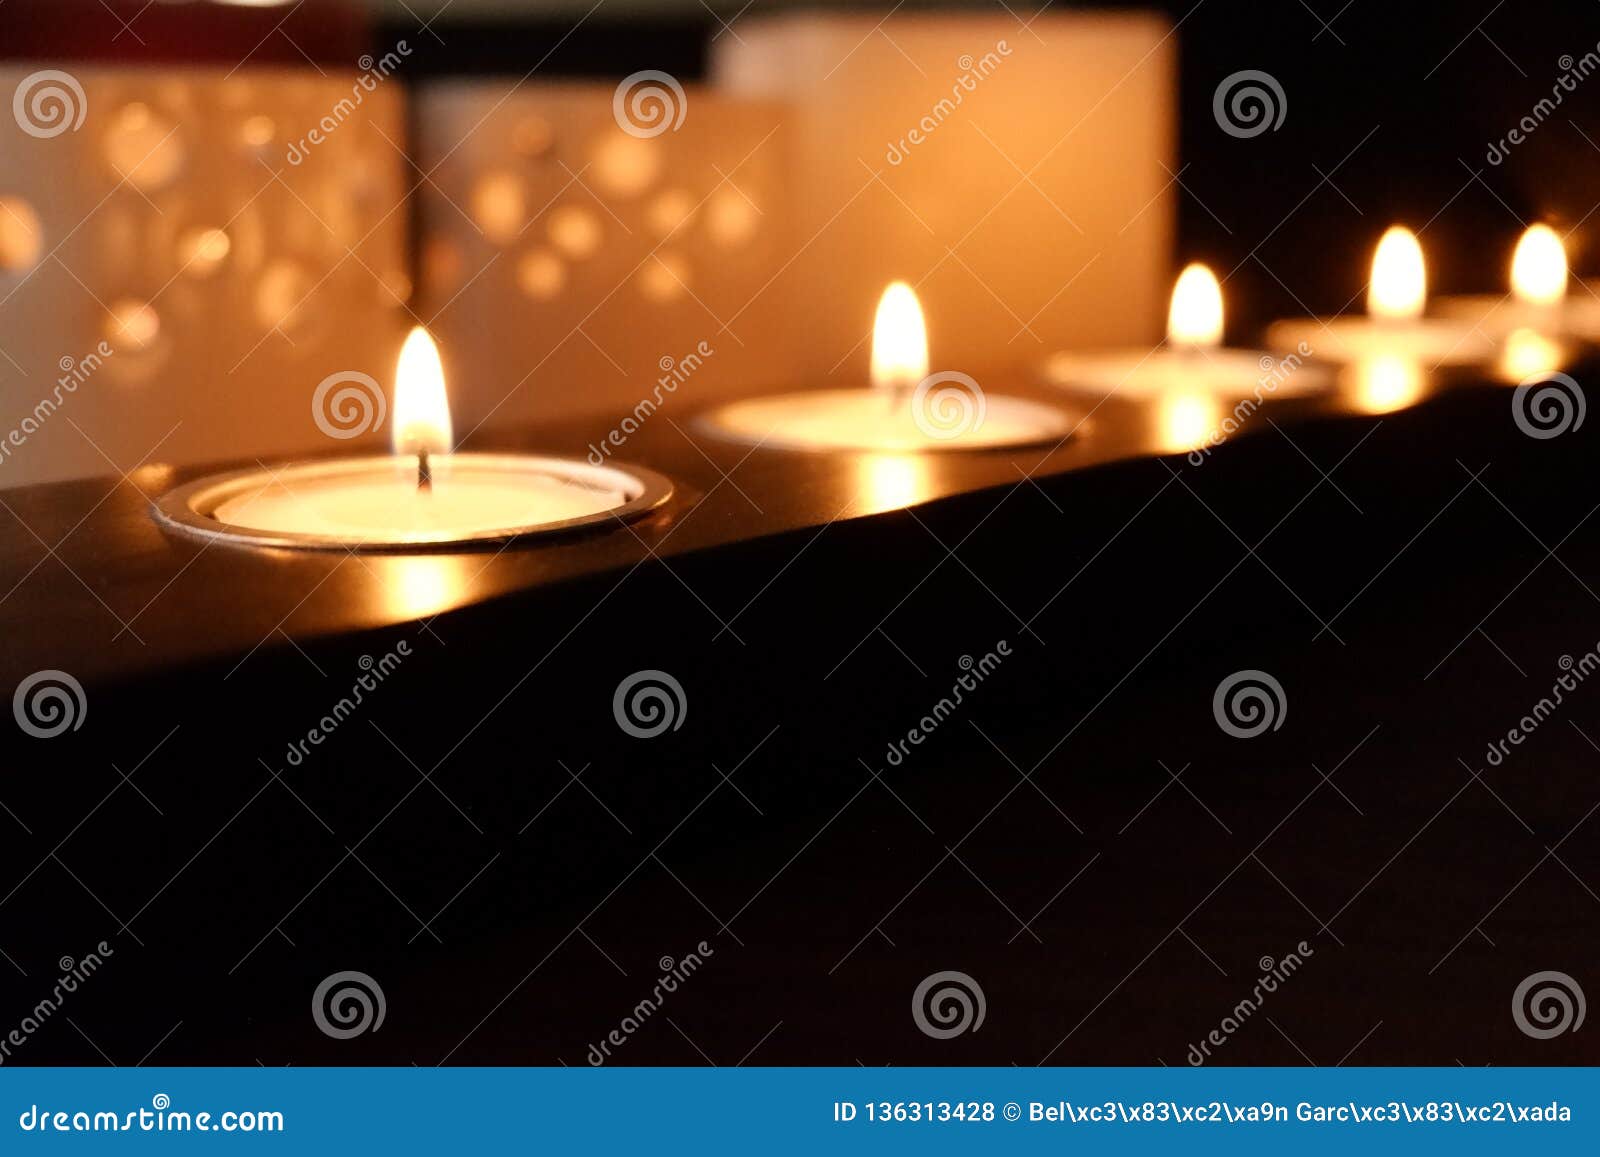 Candles for a Warm Illumination Stock Photo - Image of candles ...